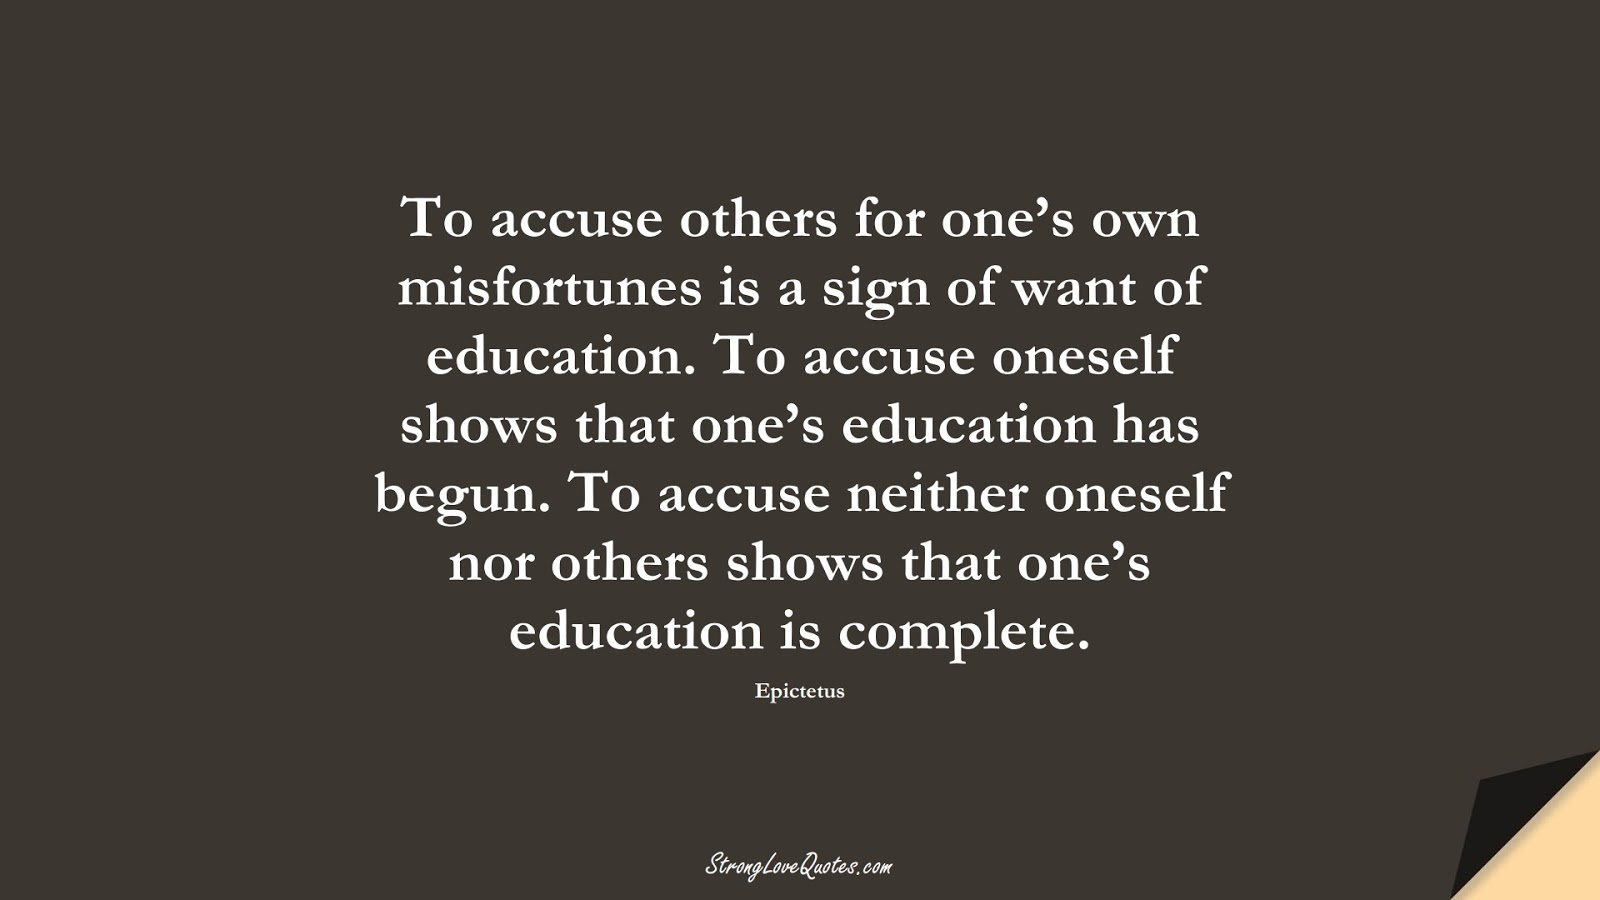 To accuse others for one’s own misfortunes is a sign of want of education. To accuse oneself shows that one’s education has begun. To accuse neither oneself nor others shows that one’s education is complete. (Epictetus);  #EducationQuotes